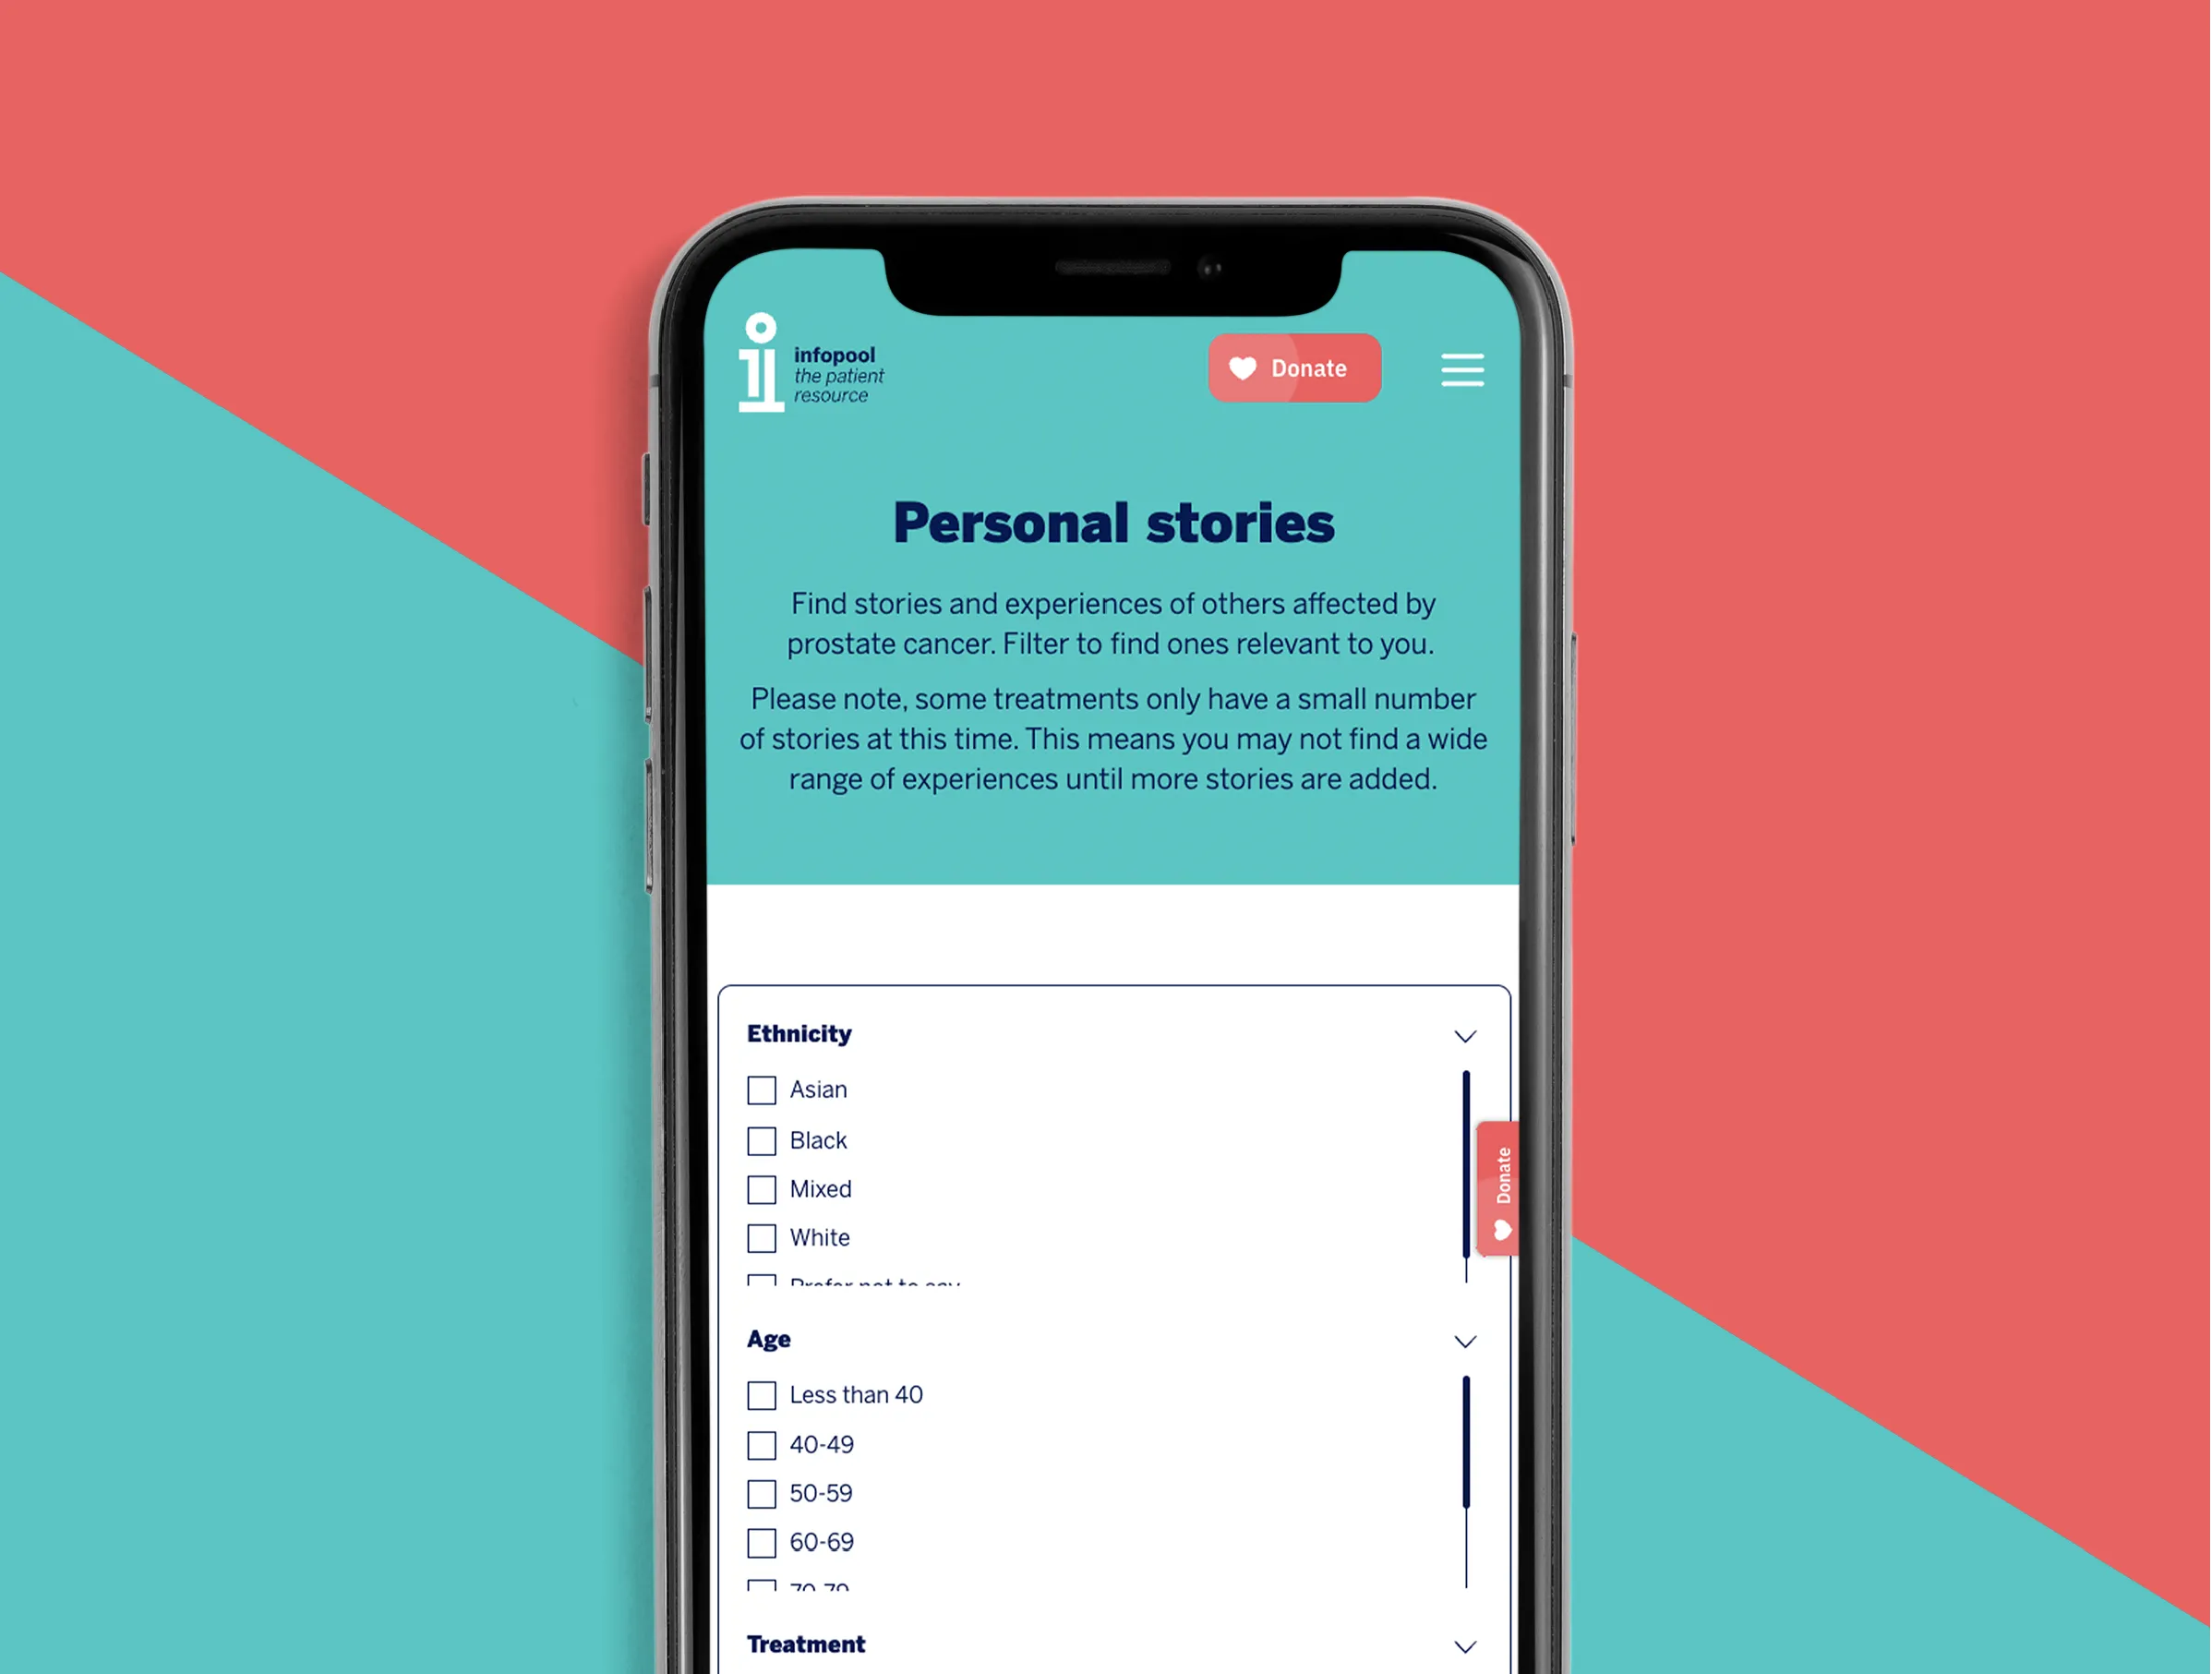 The 'Personal Stories' page of the Infopool website shown on a mobile screen